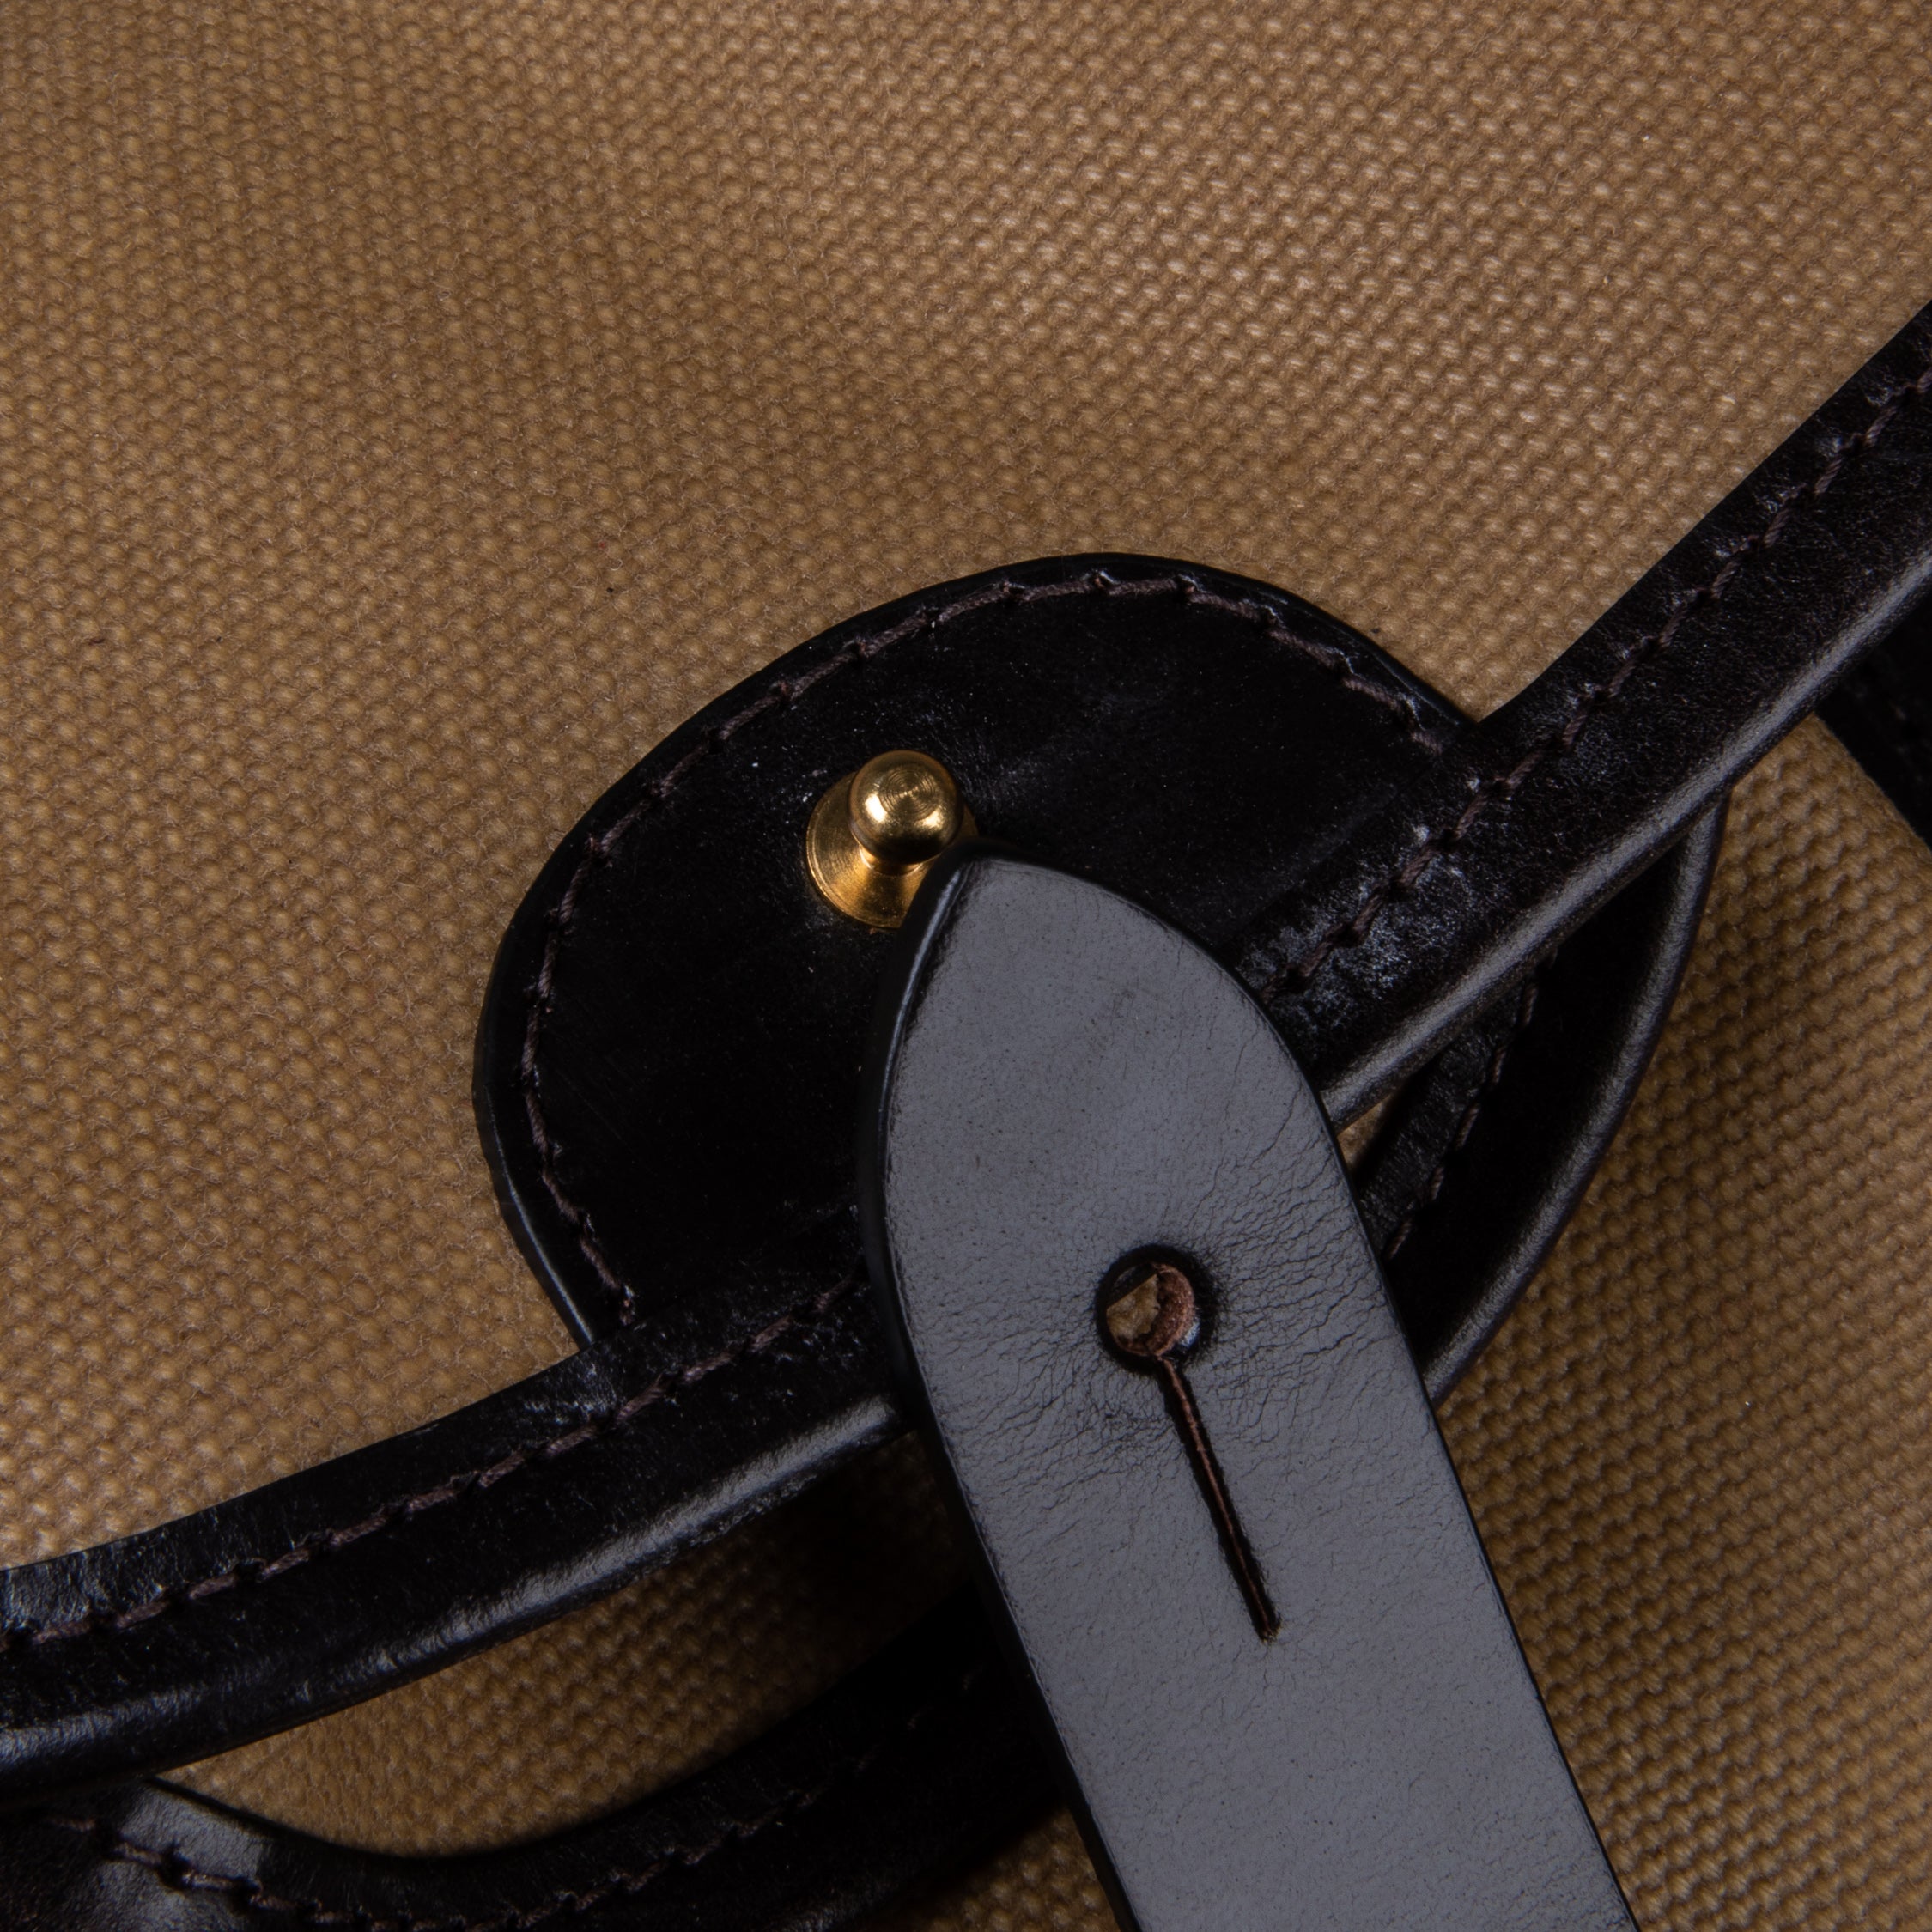 Croots Waxed Canvas Carryall Bag Sand